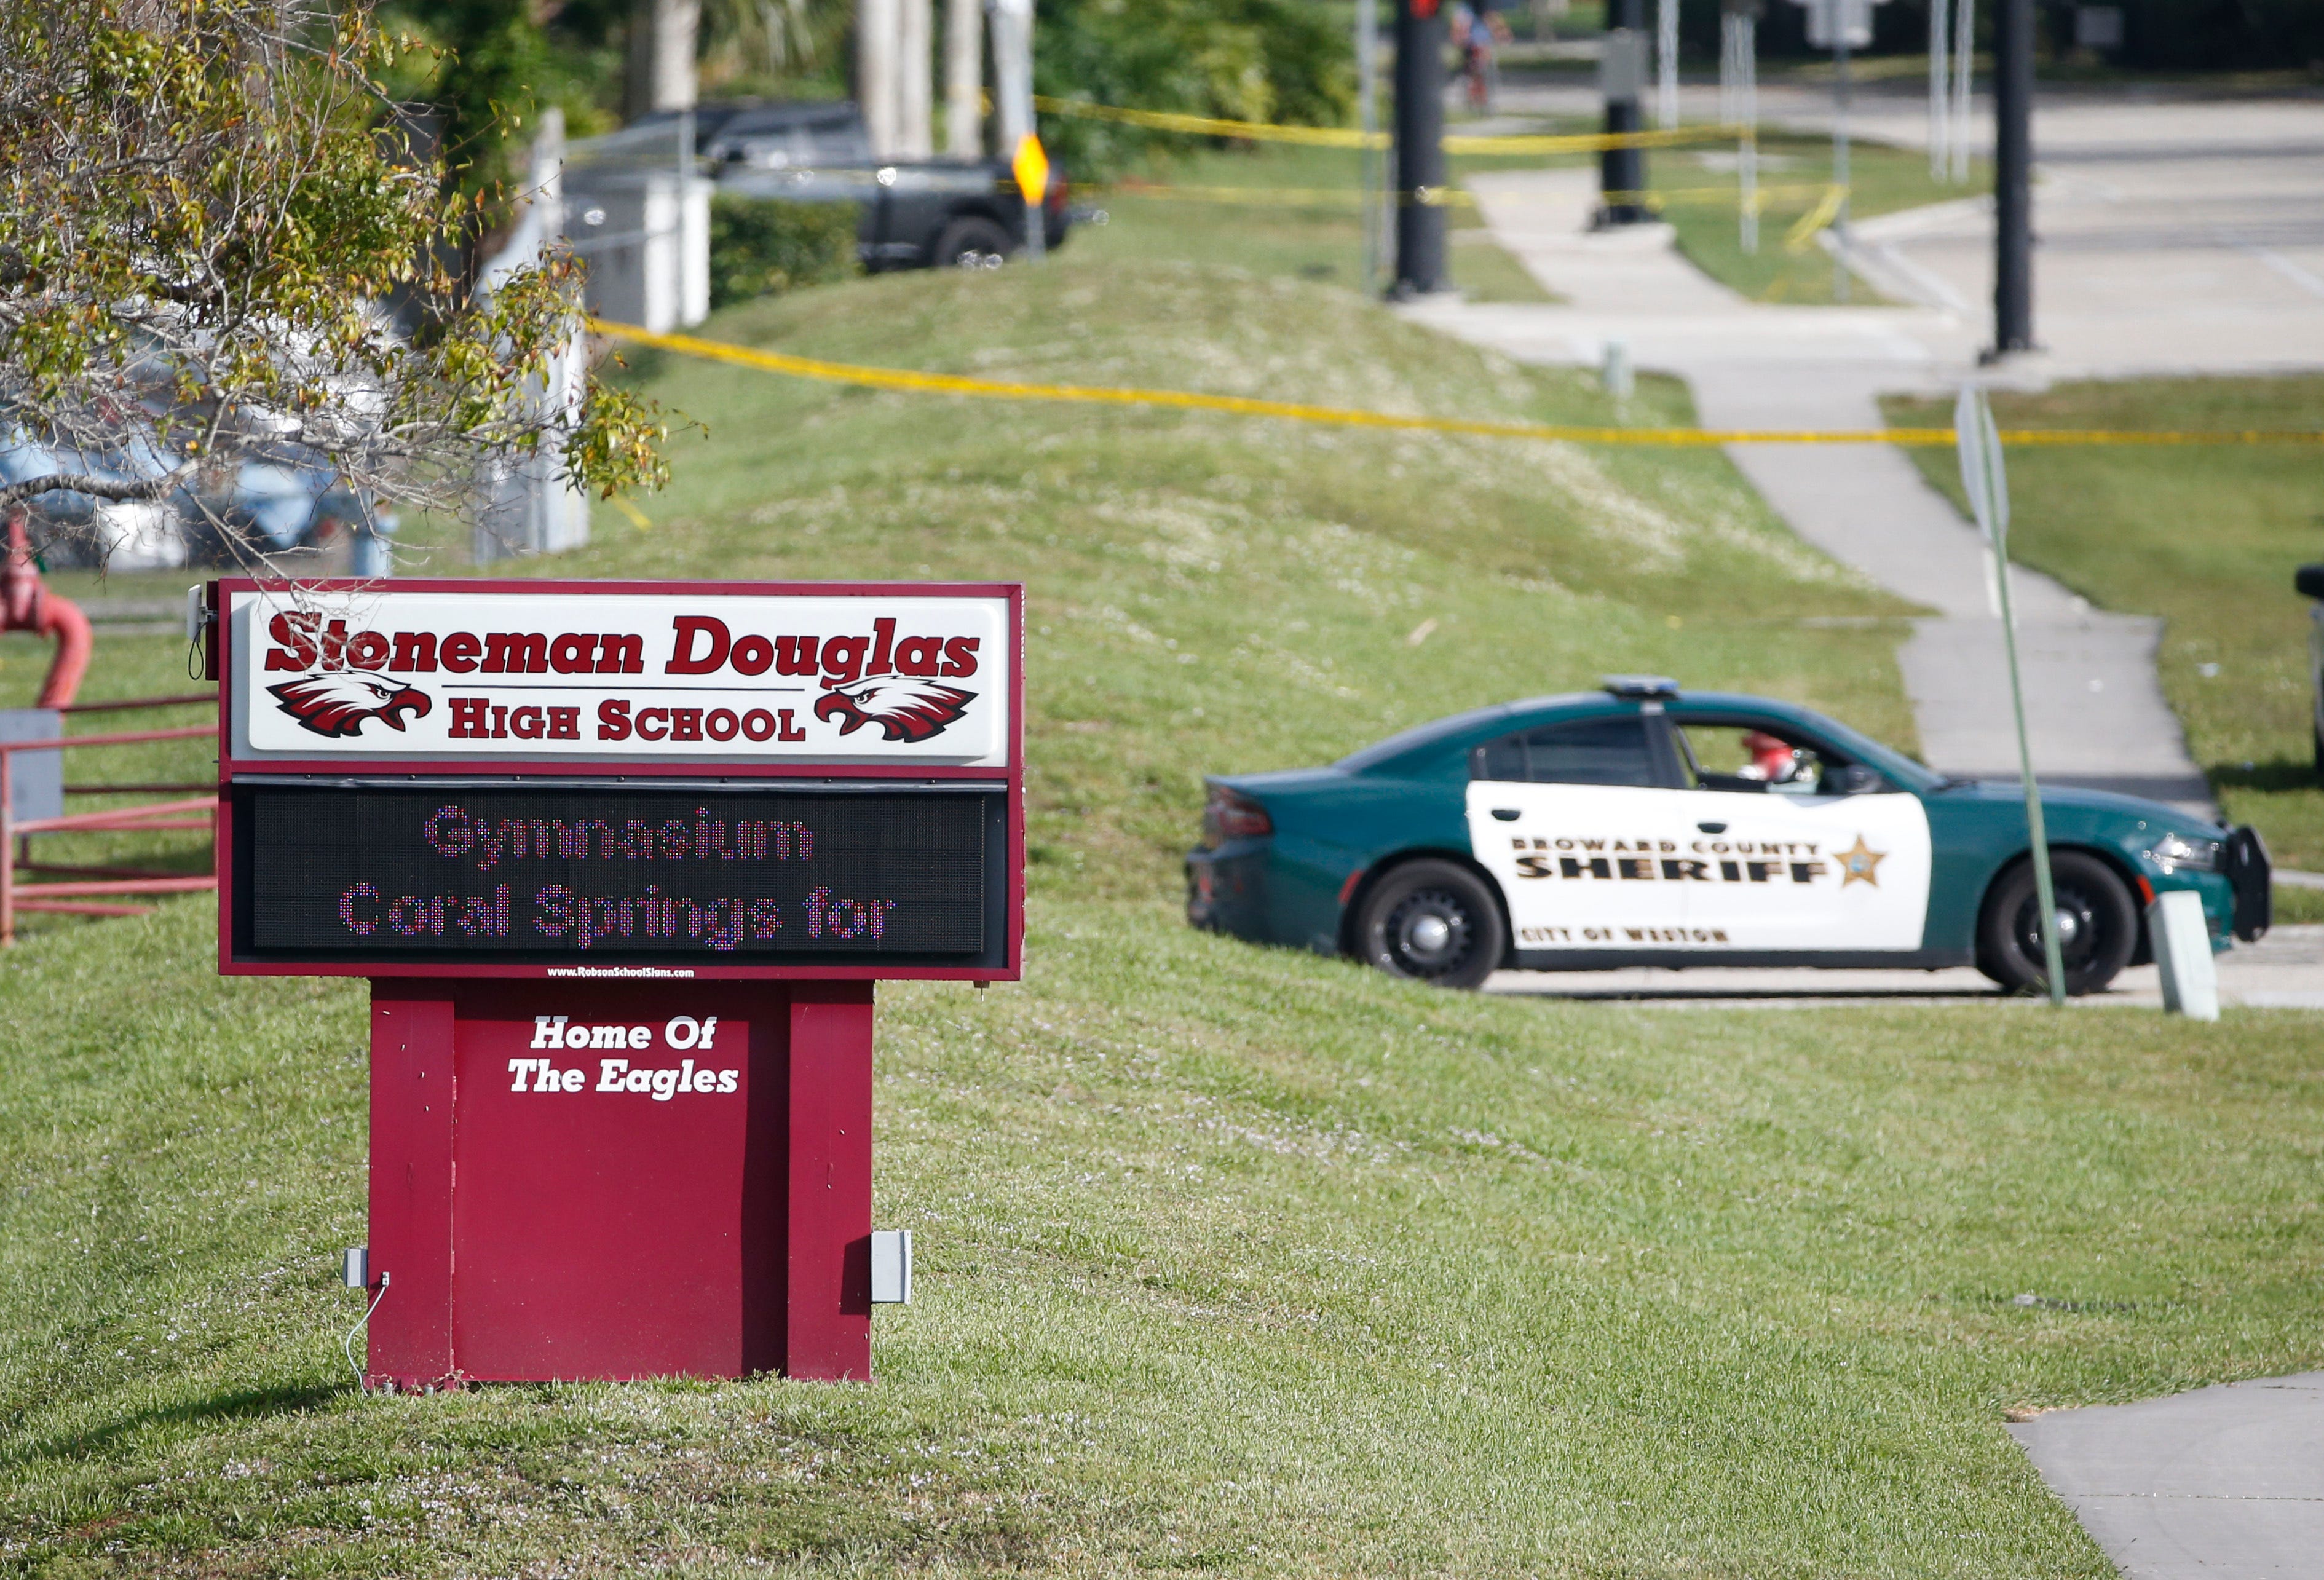 Florida school shooting: Hoaxes, doctored tweets and Russian bots spread false news3200 x 1680